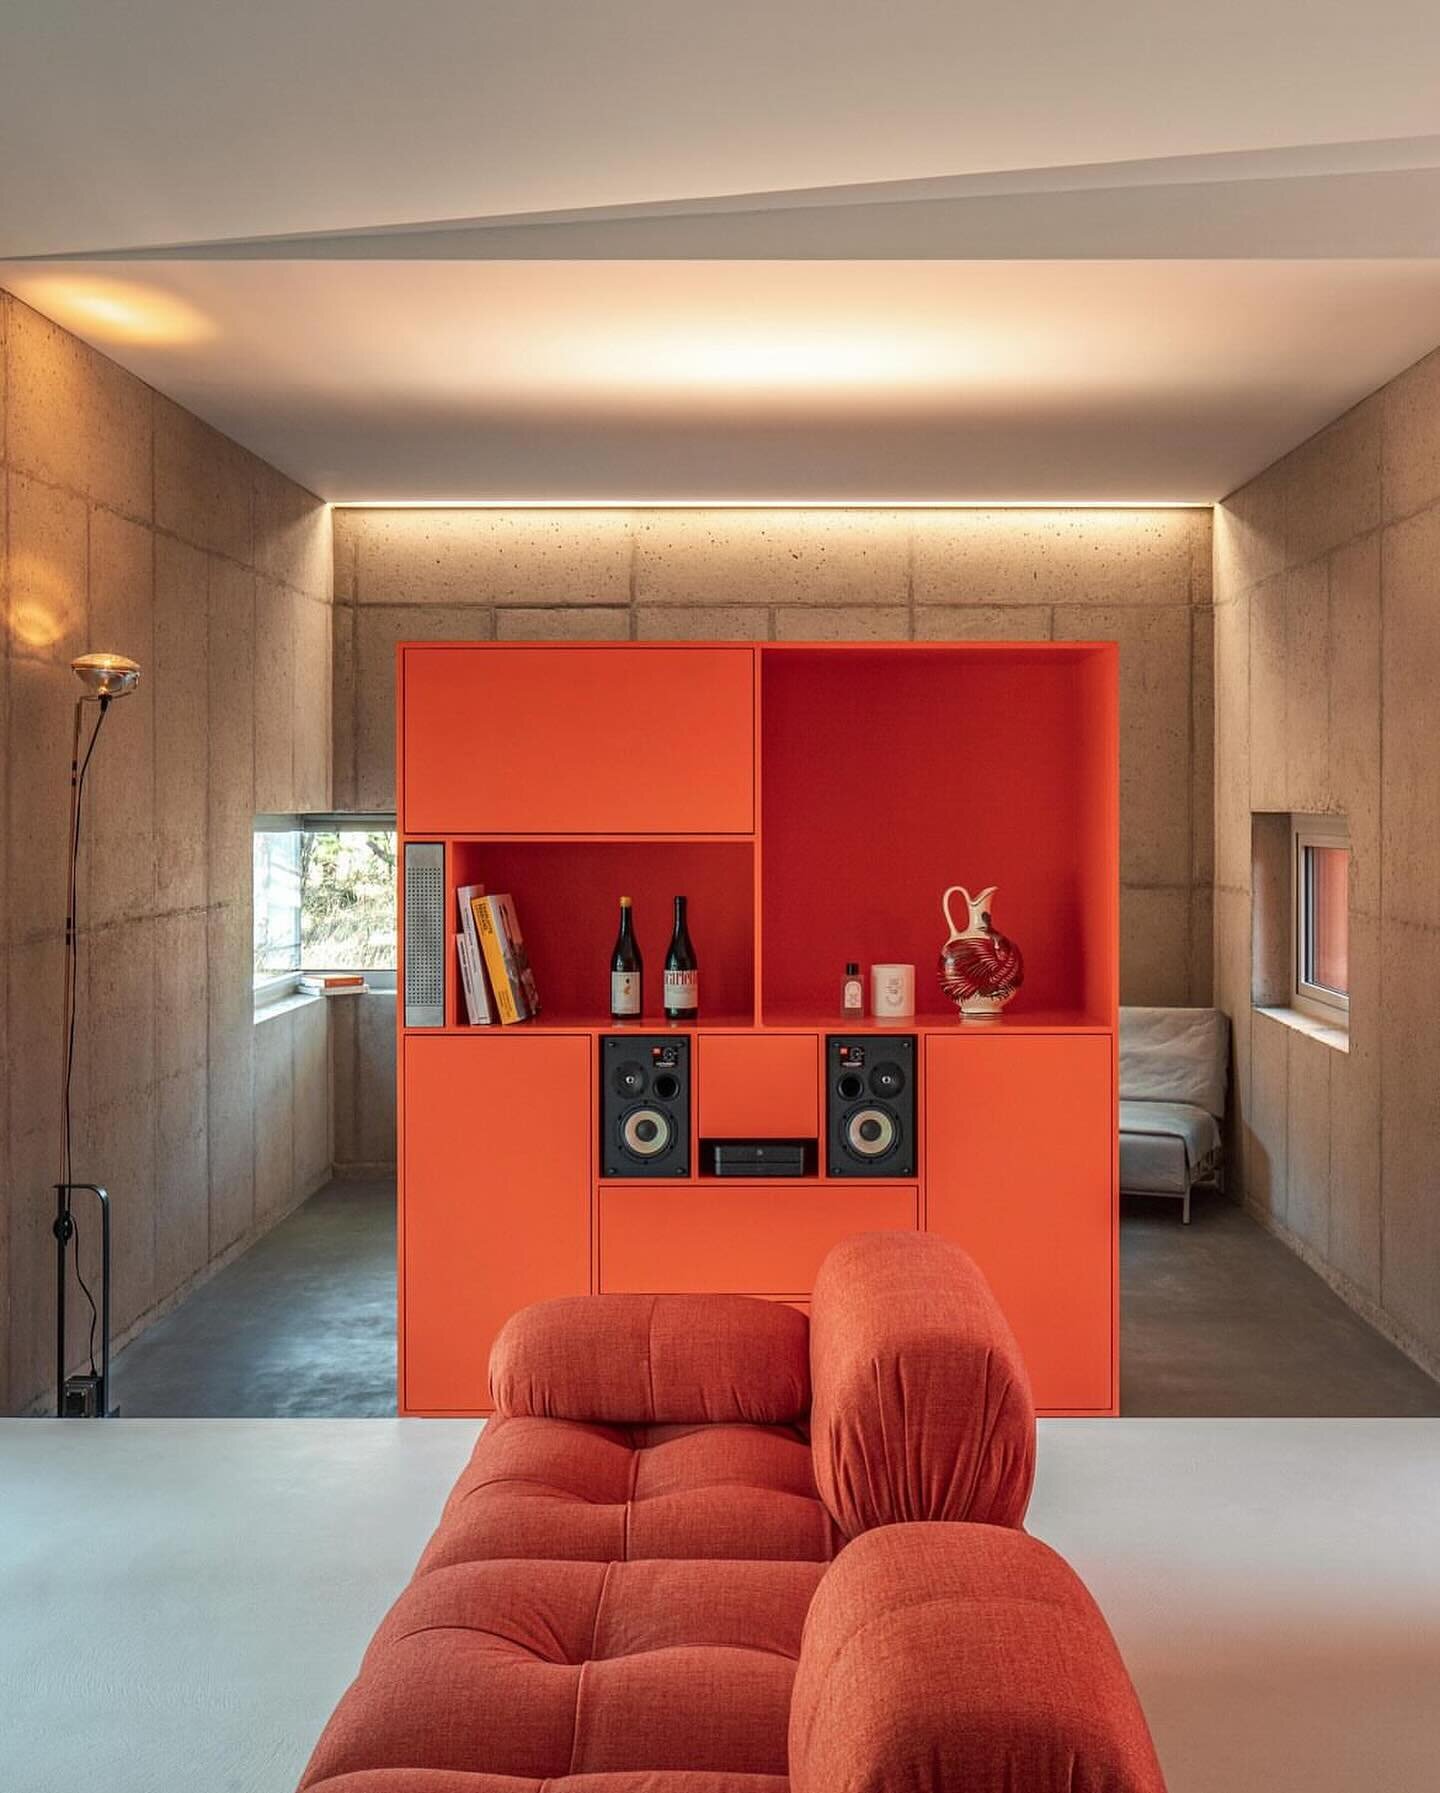 what are your thoughts on orange? by @oneaftr, photo by Jang Mi ❣︎
&bull;
&bull;
&bull;
#architecturaldigest #architecturalporn #calminghomes #dailyinspiration #designinspo #houseoftheday #moderndesign #neutralhomes #neutraltones #residentialdesign #